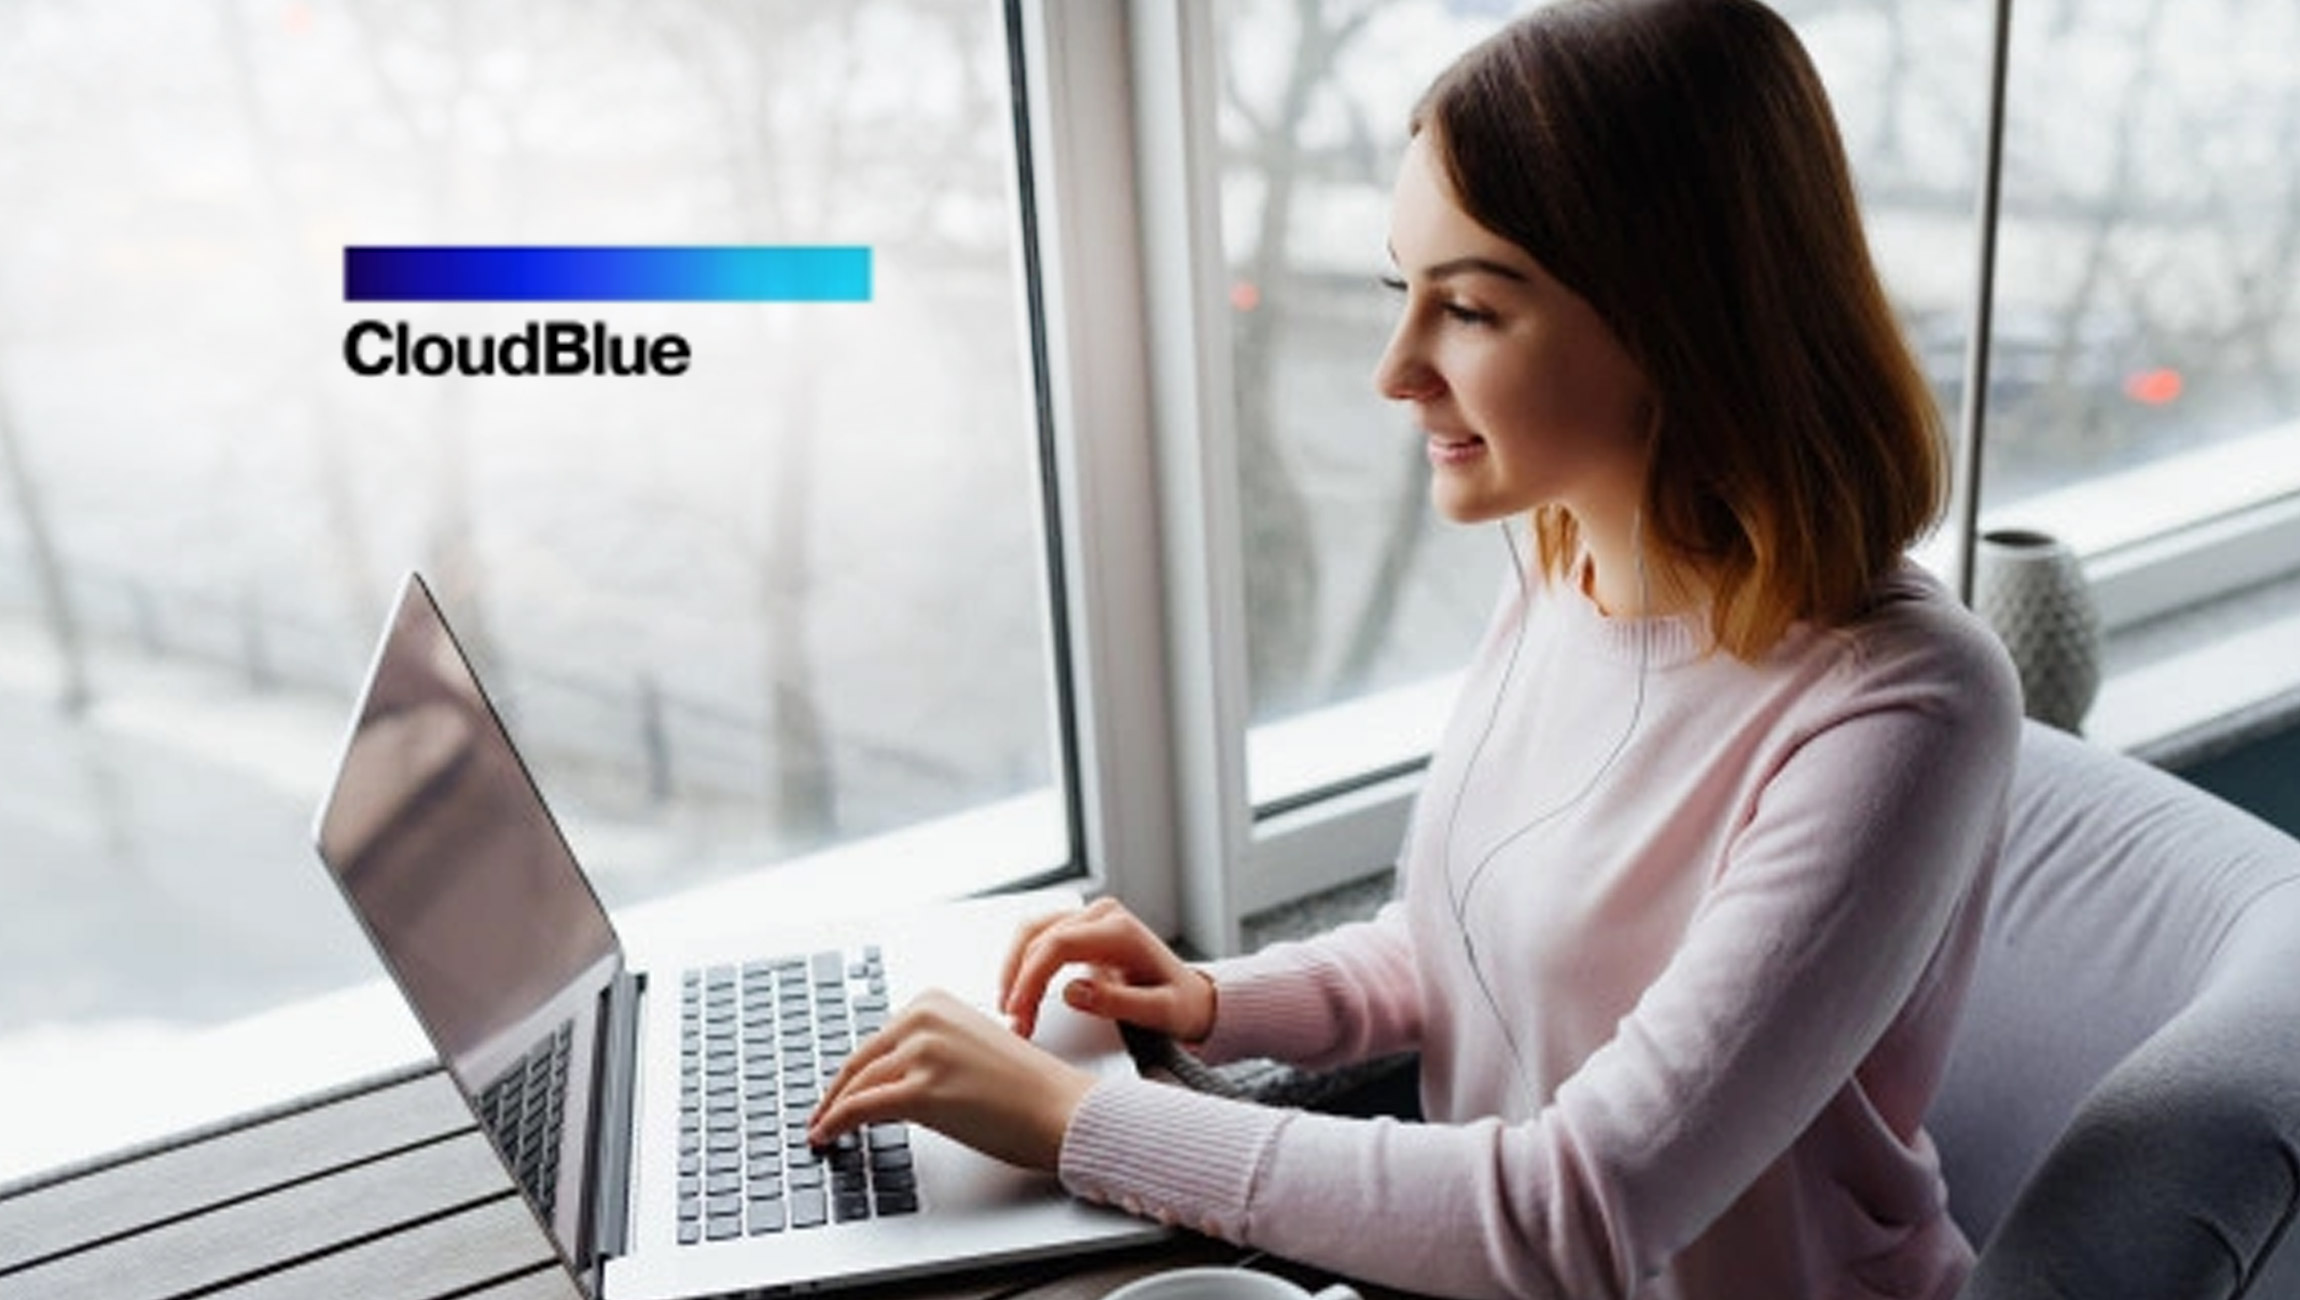 CloudBlue-Increases-Operational-Efficiency-for-Vendors-and-Service-Providers-with-CloudBlue-Connect™-Platform.jpg